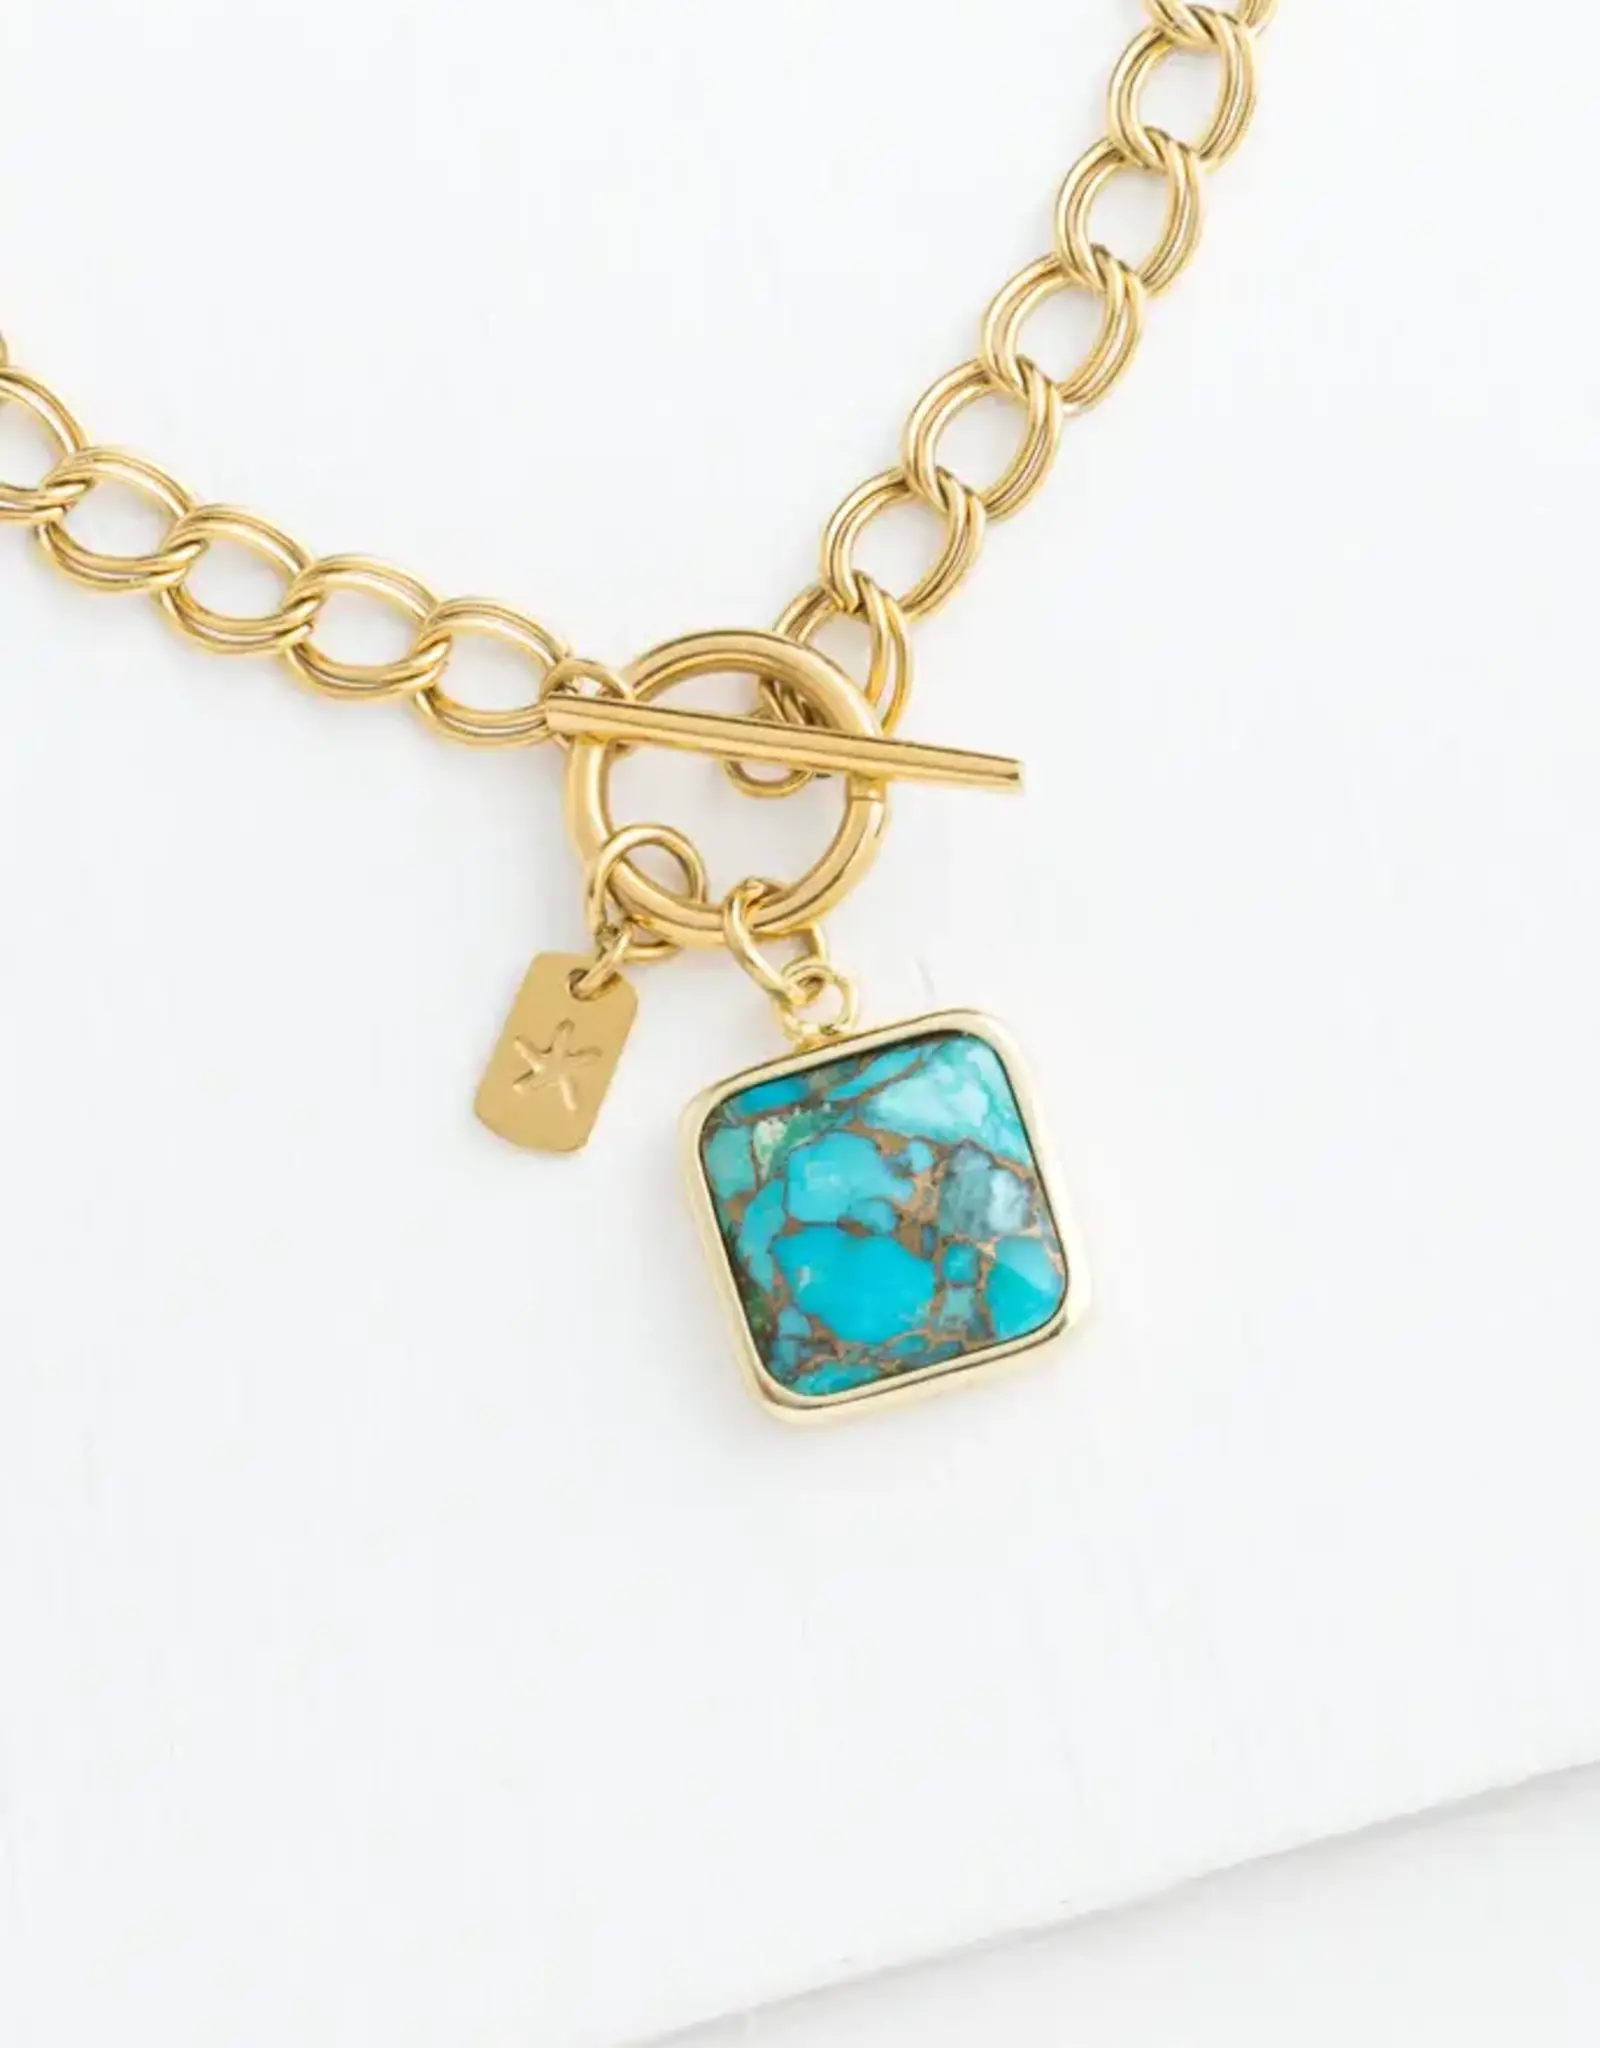 Starfish Project Abundant Hope Necklace in Turquoise